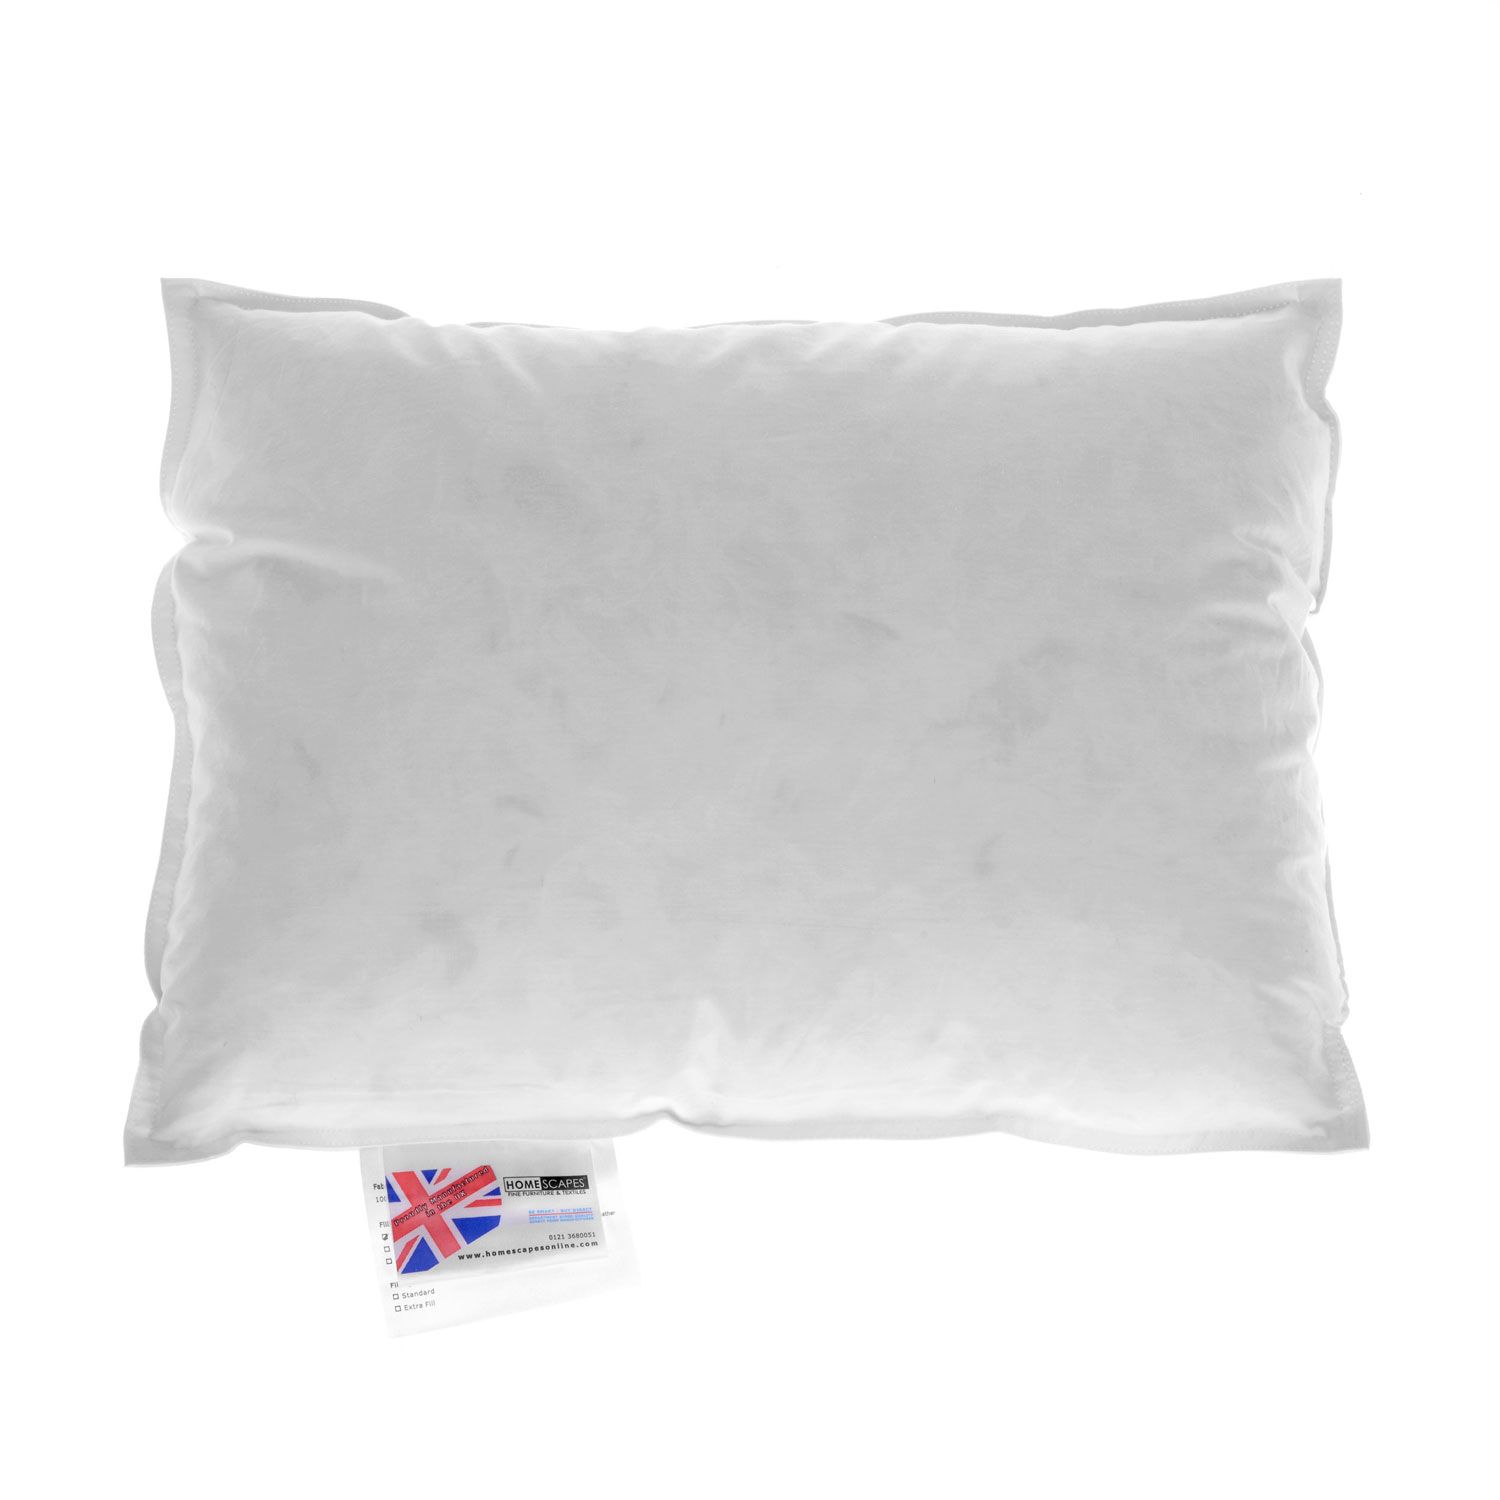 BRITISH HANDMADE EXTRA FILLED DUCK FEATHER CUSHION INNER PADS INSERT FILLERS Pack of 2, 20X20 